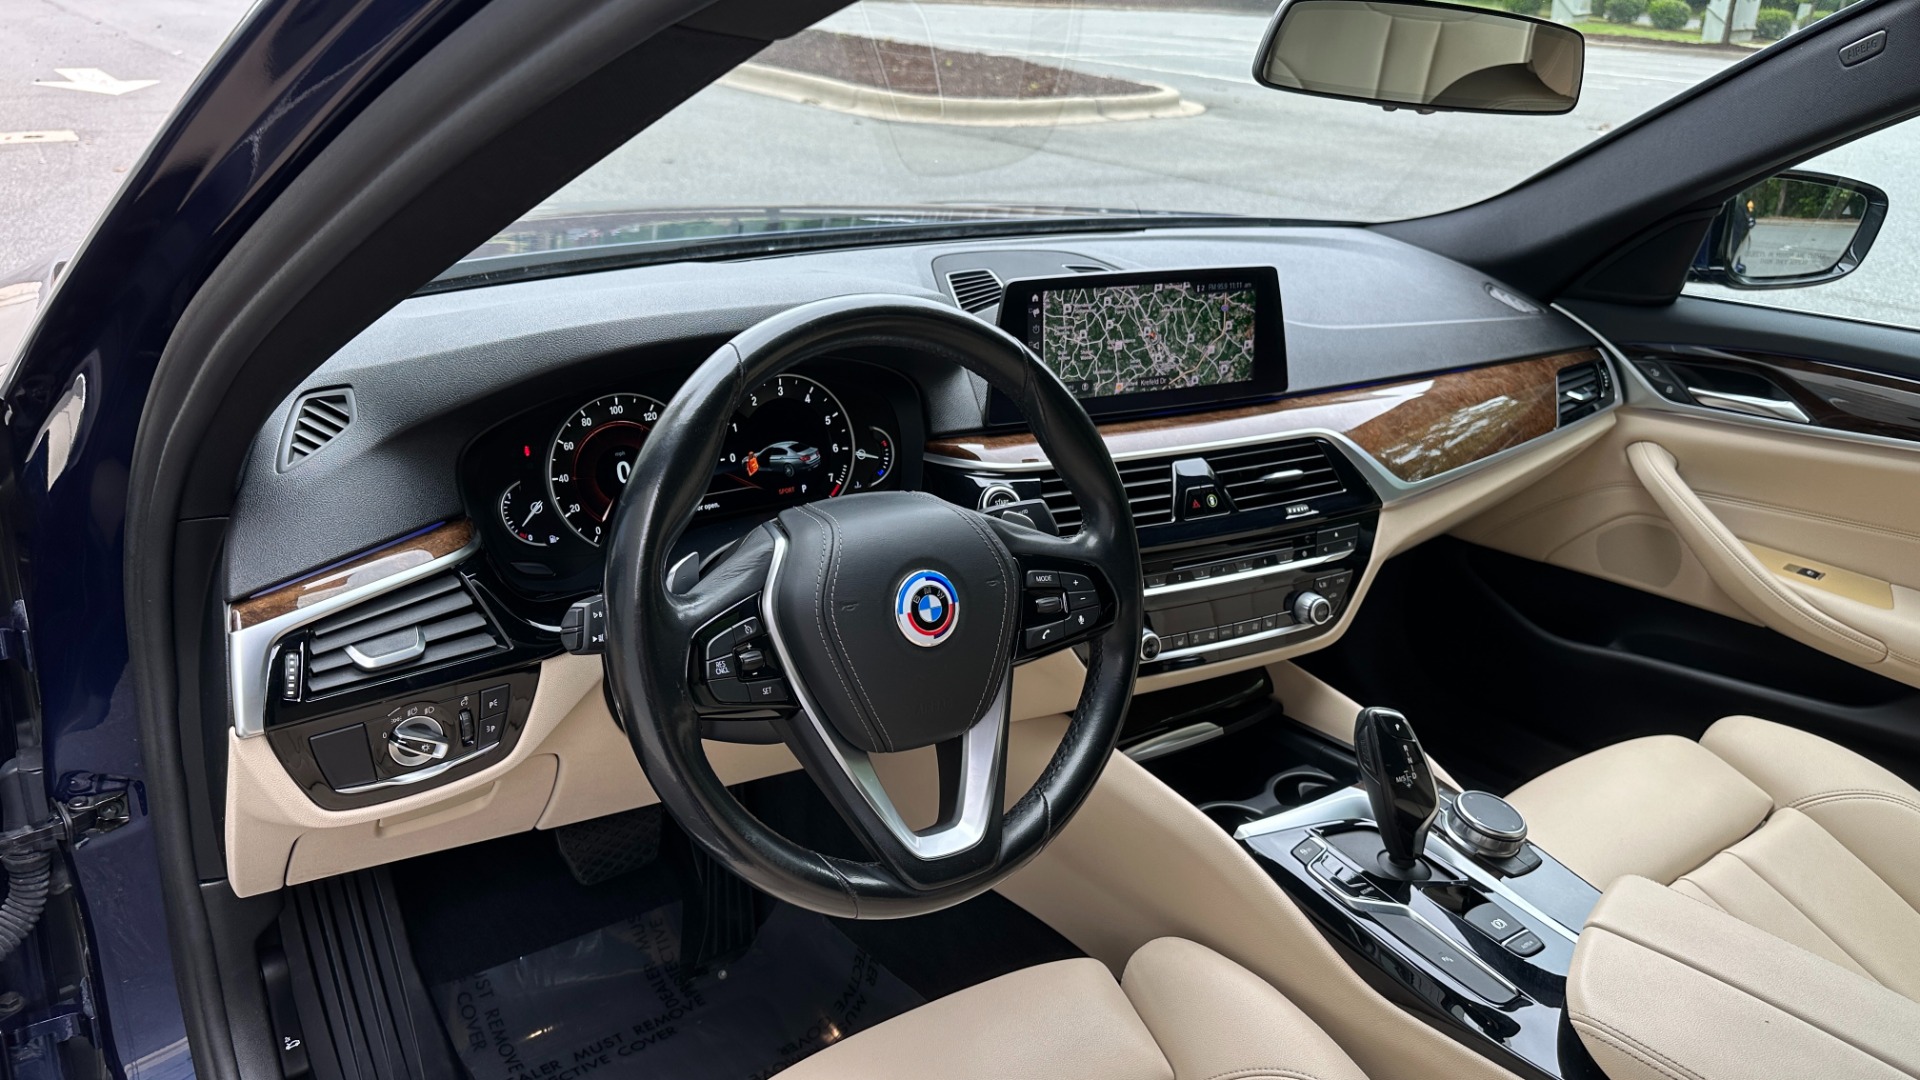 Used 2019 BMW 5 Series 530i / LIGHTING PACKAGE / CONVENIENCE PACKAGE / 19IN WHEELS for sale Sold at Formula Imports in Charlotte NC 28227 12